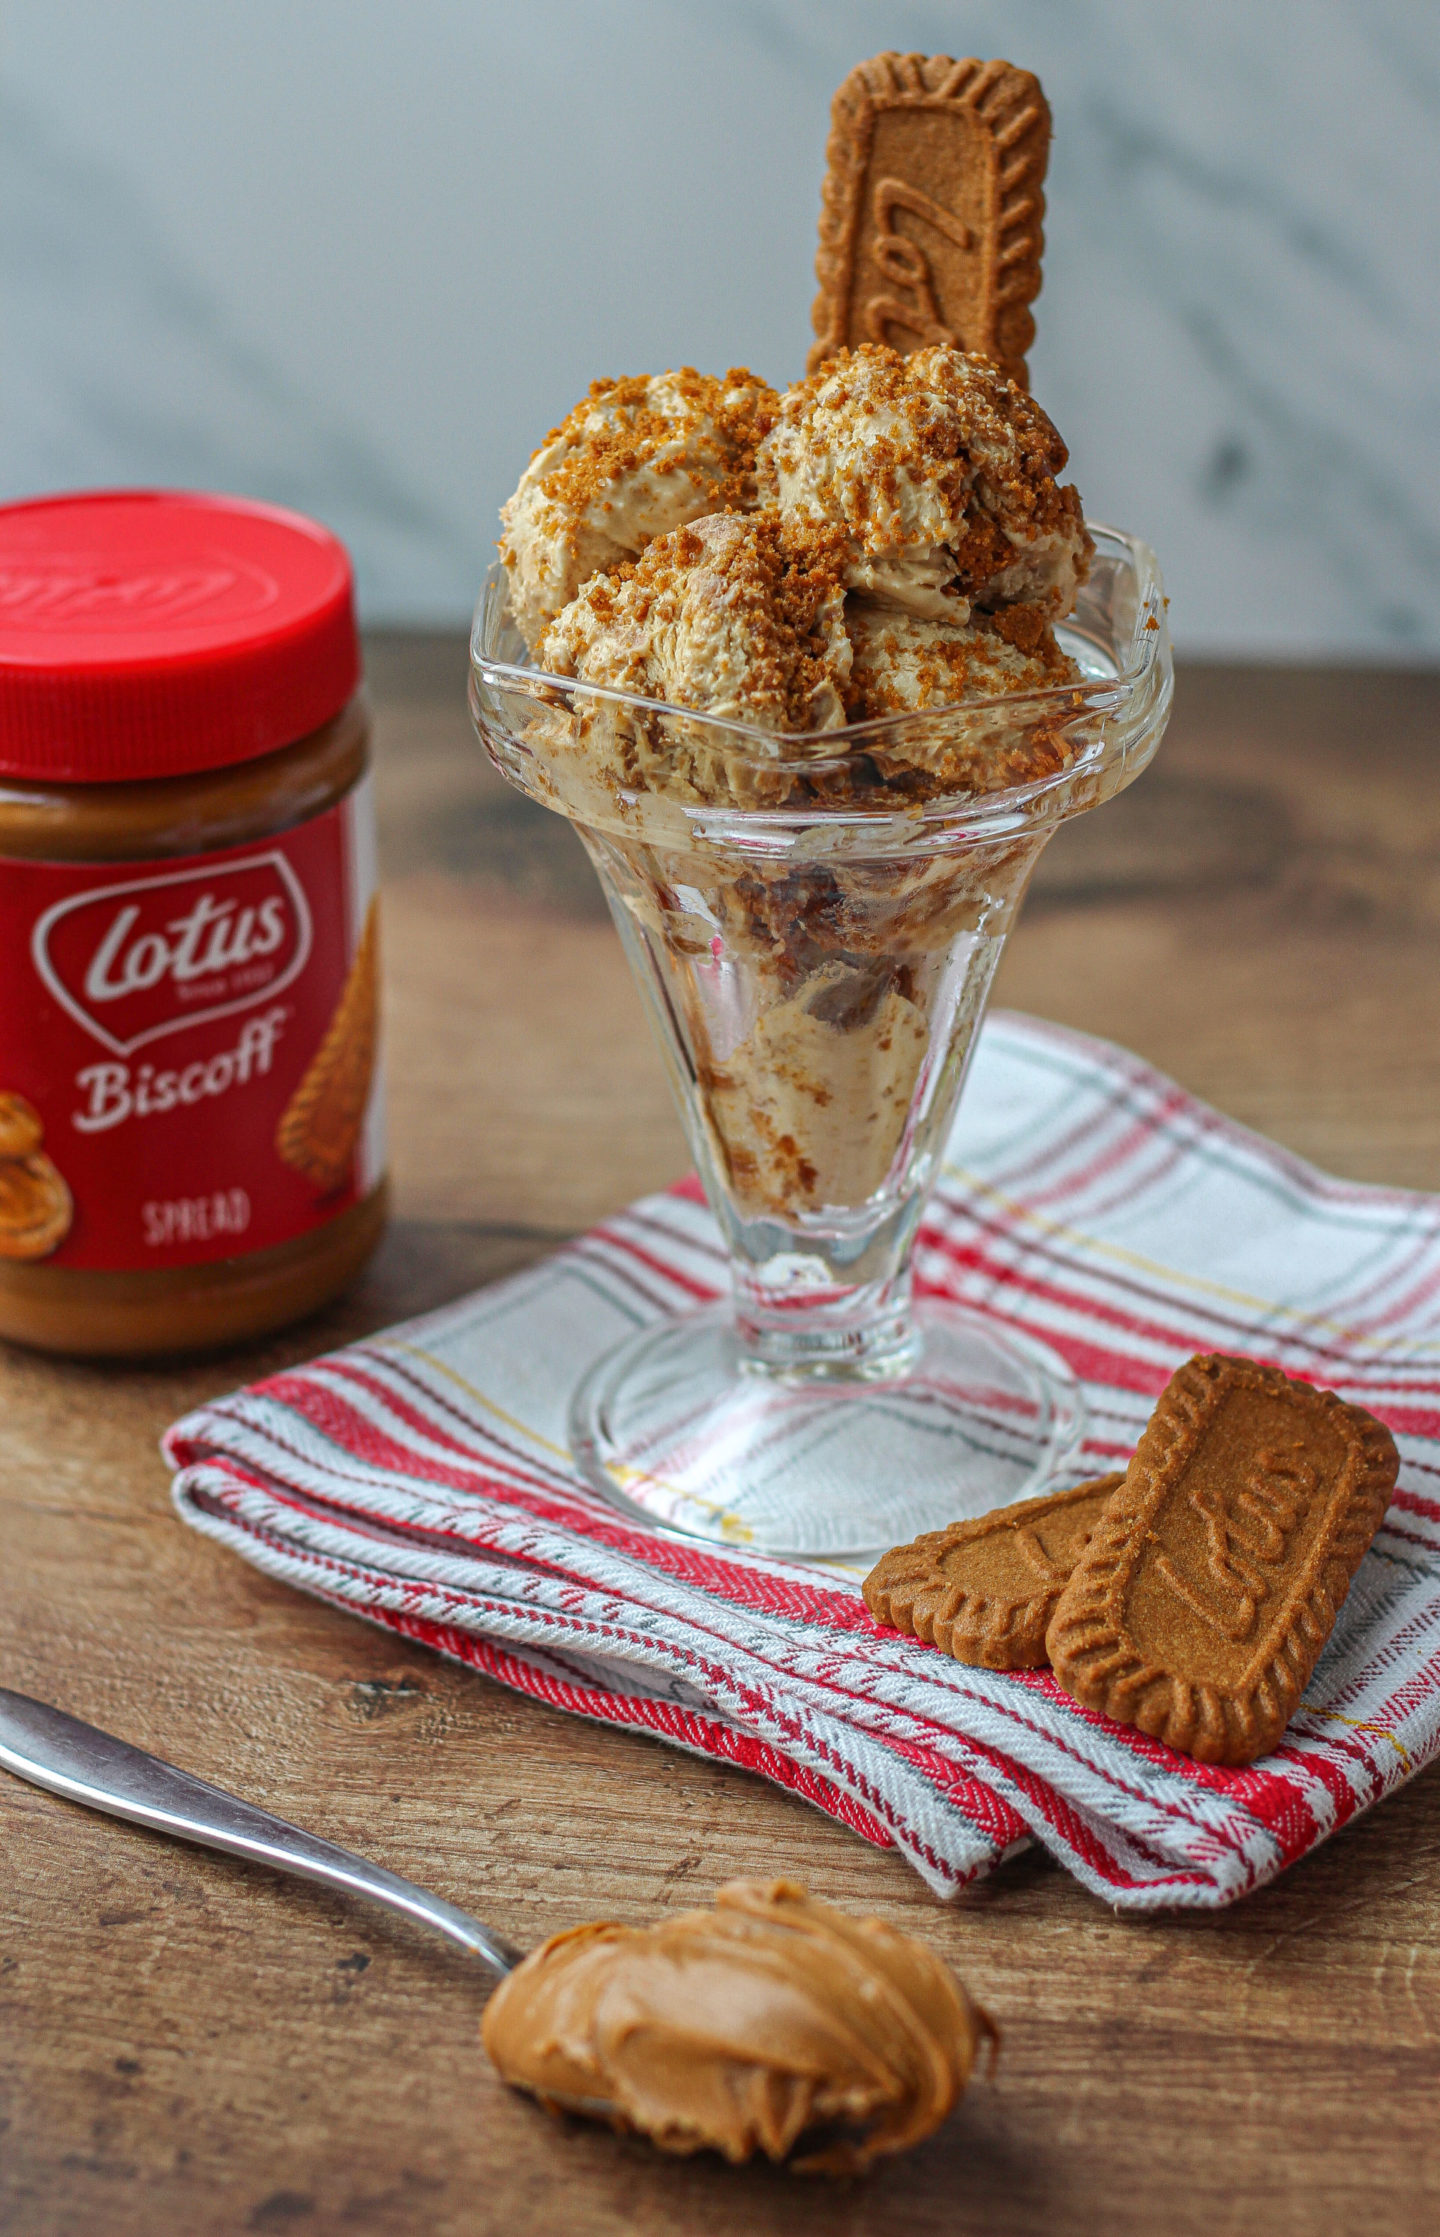 biscoff ice cream sundae with biscoff biscuits and spread jar